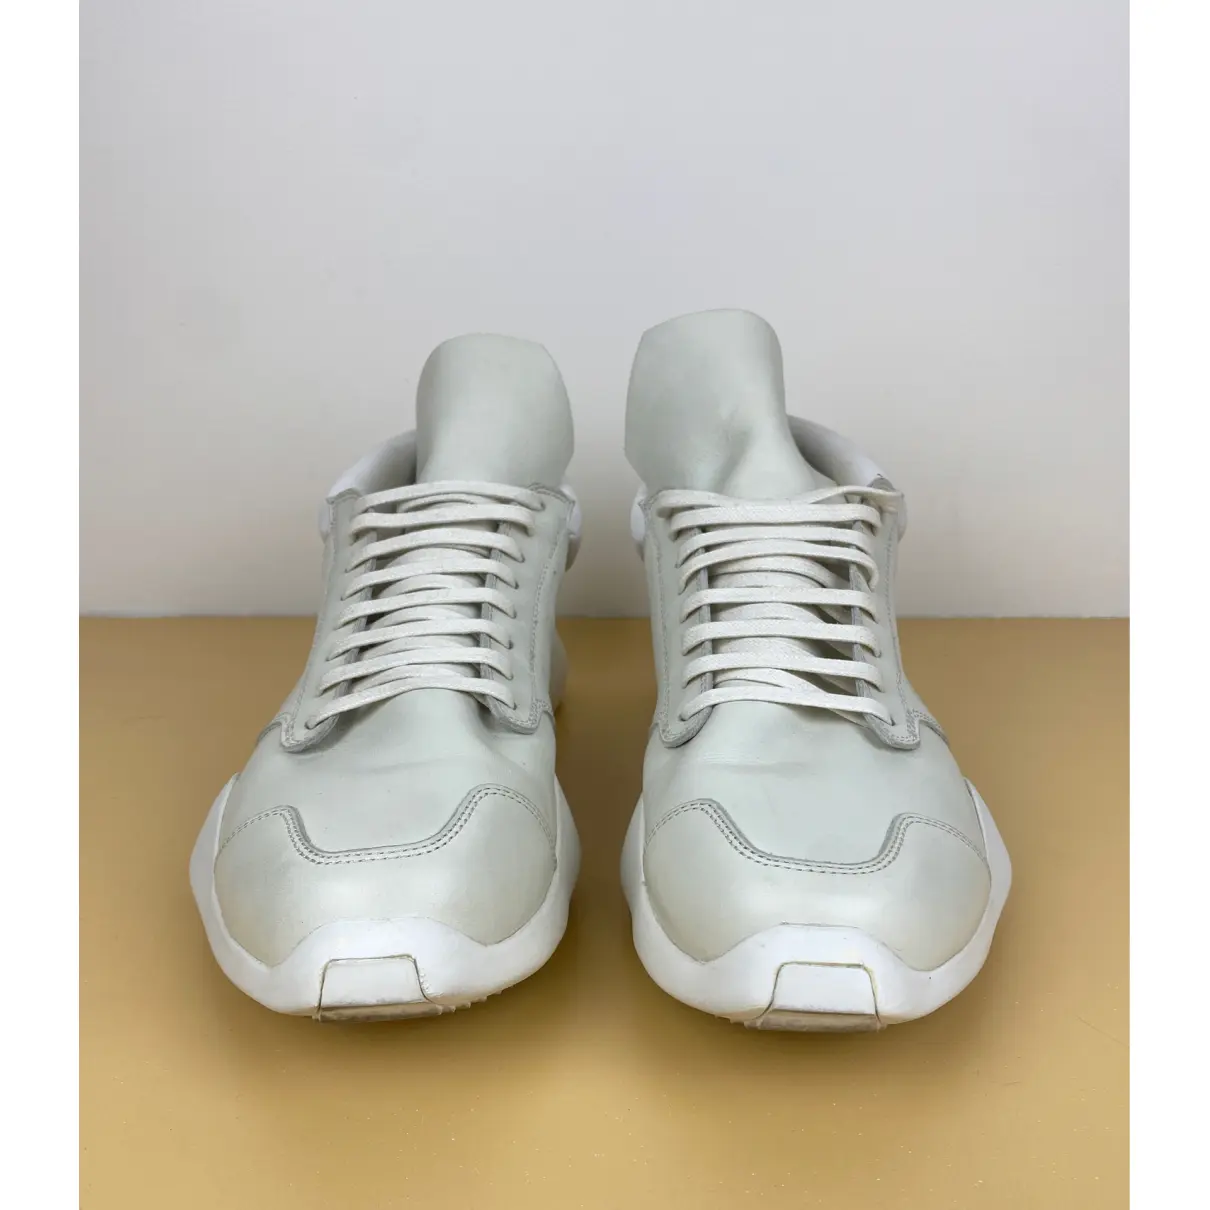 Buy Adidas & Rick owens Leather low trainers online